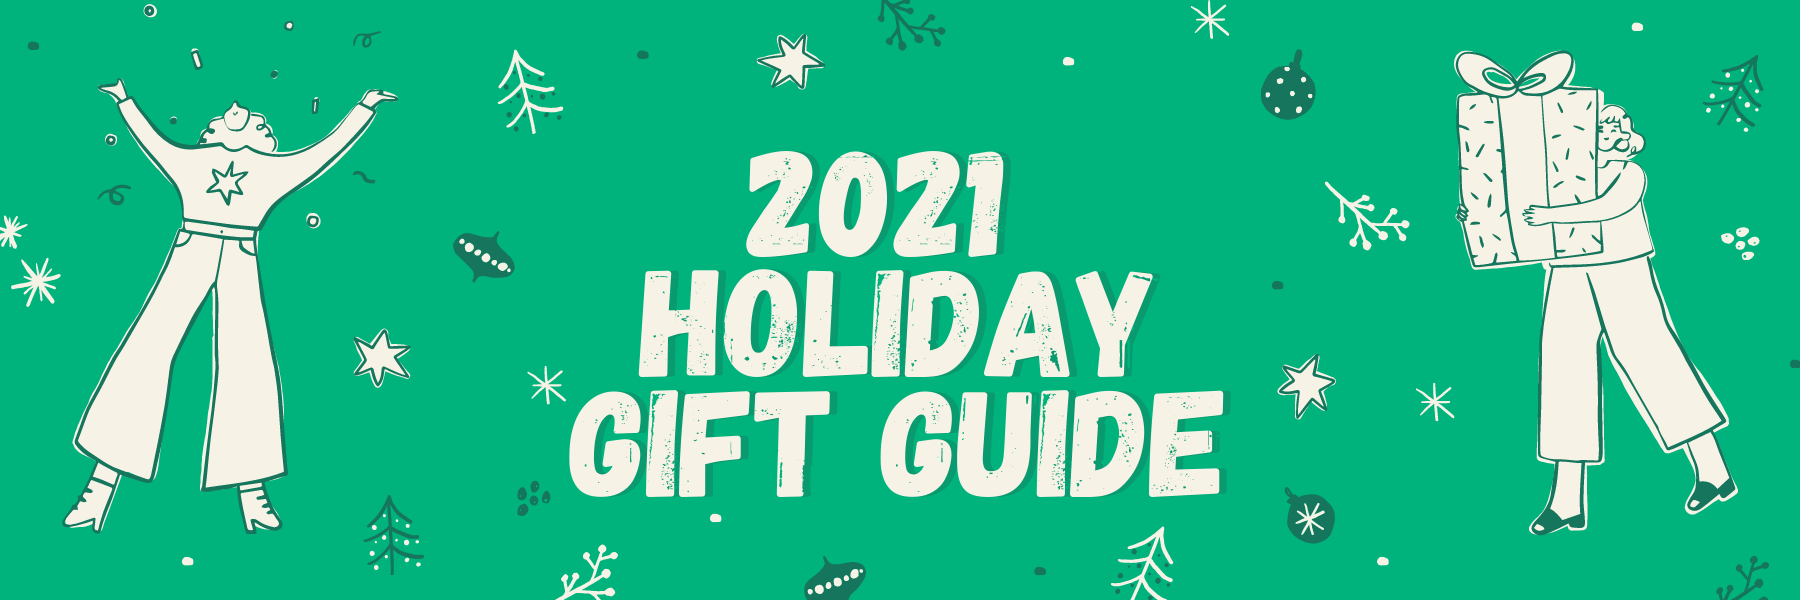 Greedy Reads Remington 2021 Holiday Gift Guide pic